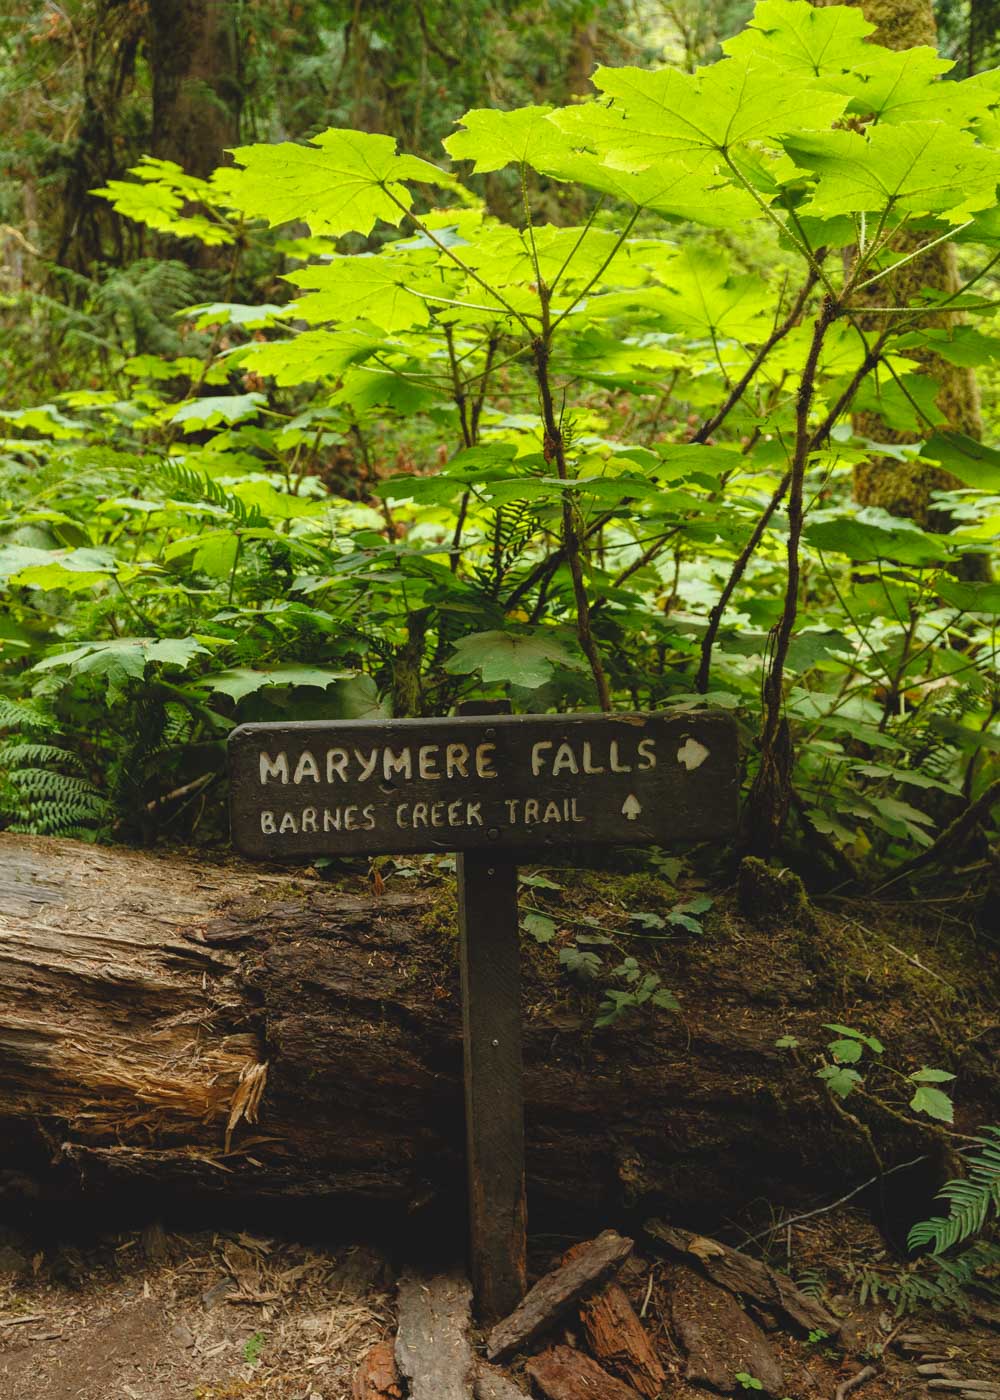 A wooden trailhead sign in the forest directing hikers to Marymere Falls or Barnes Creek Trail.